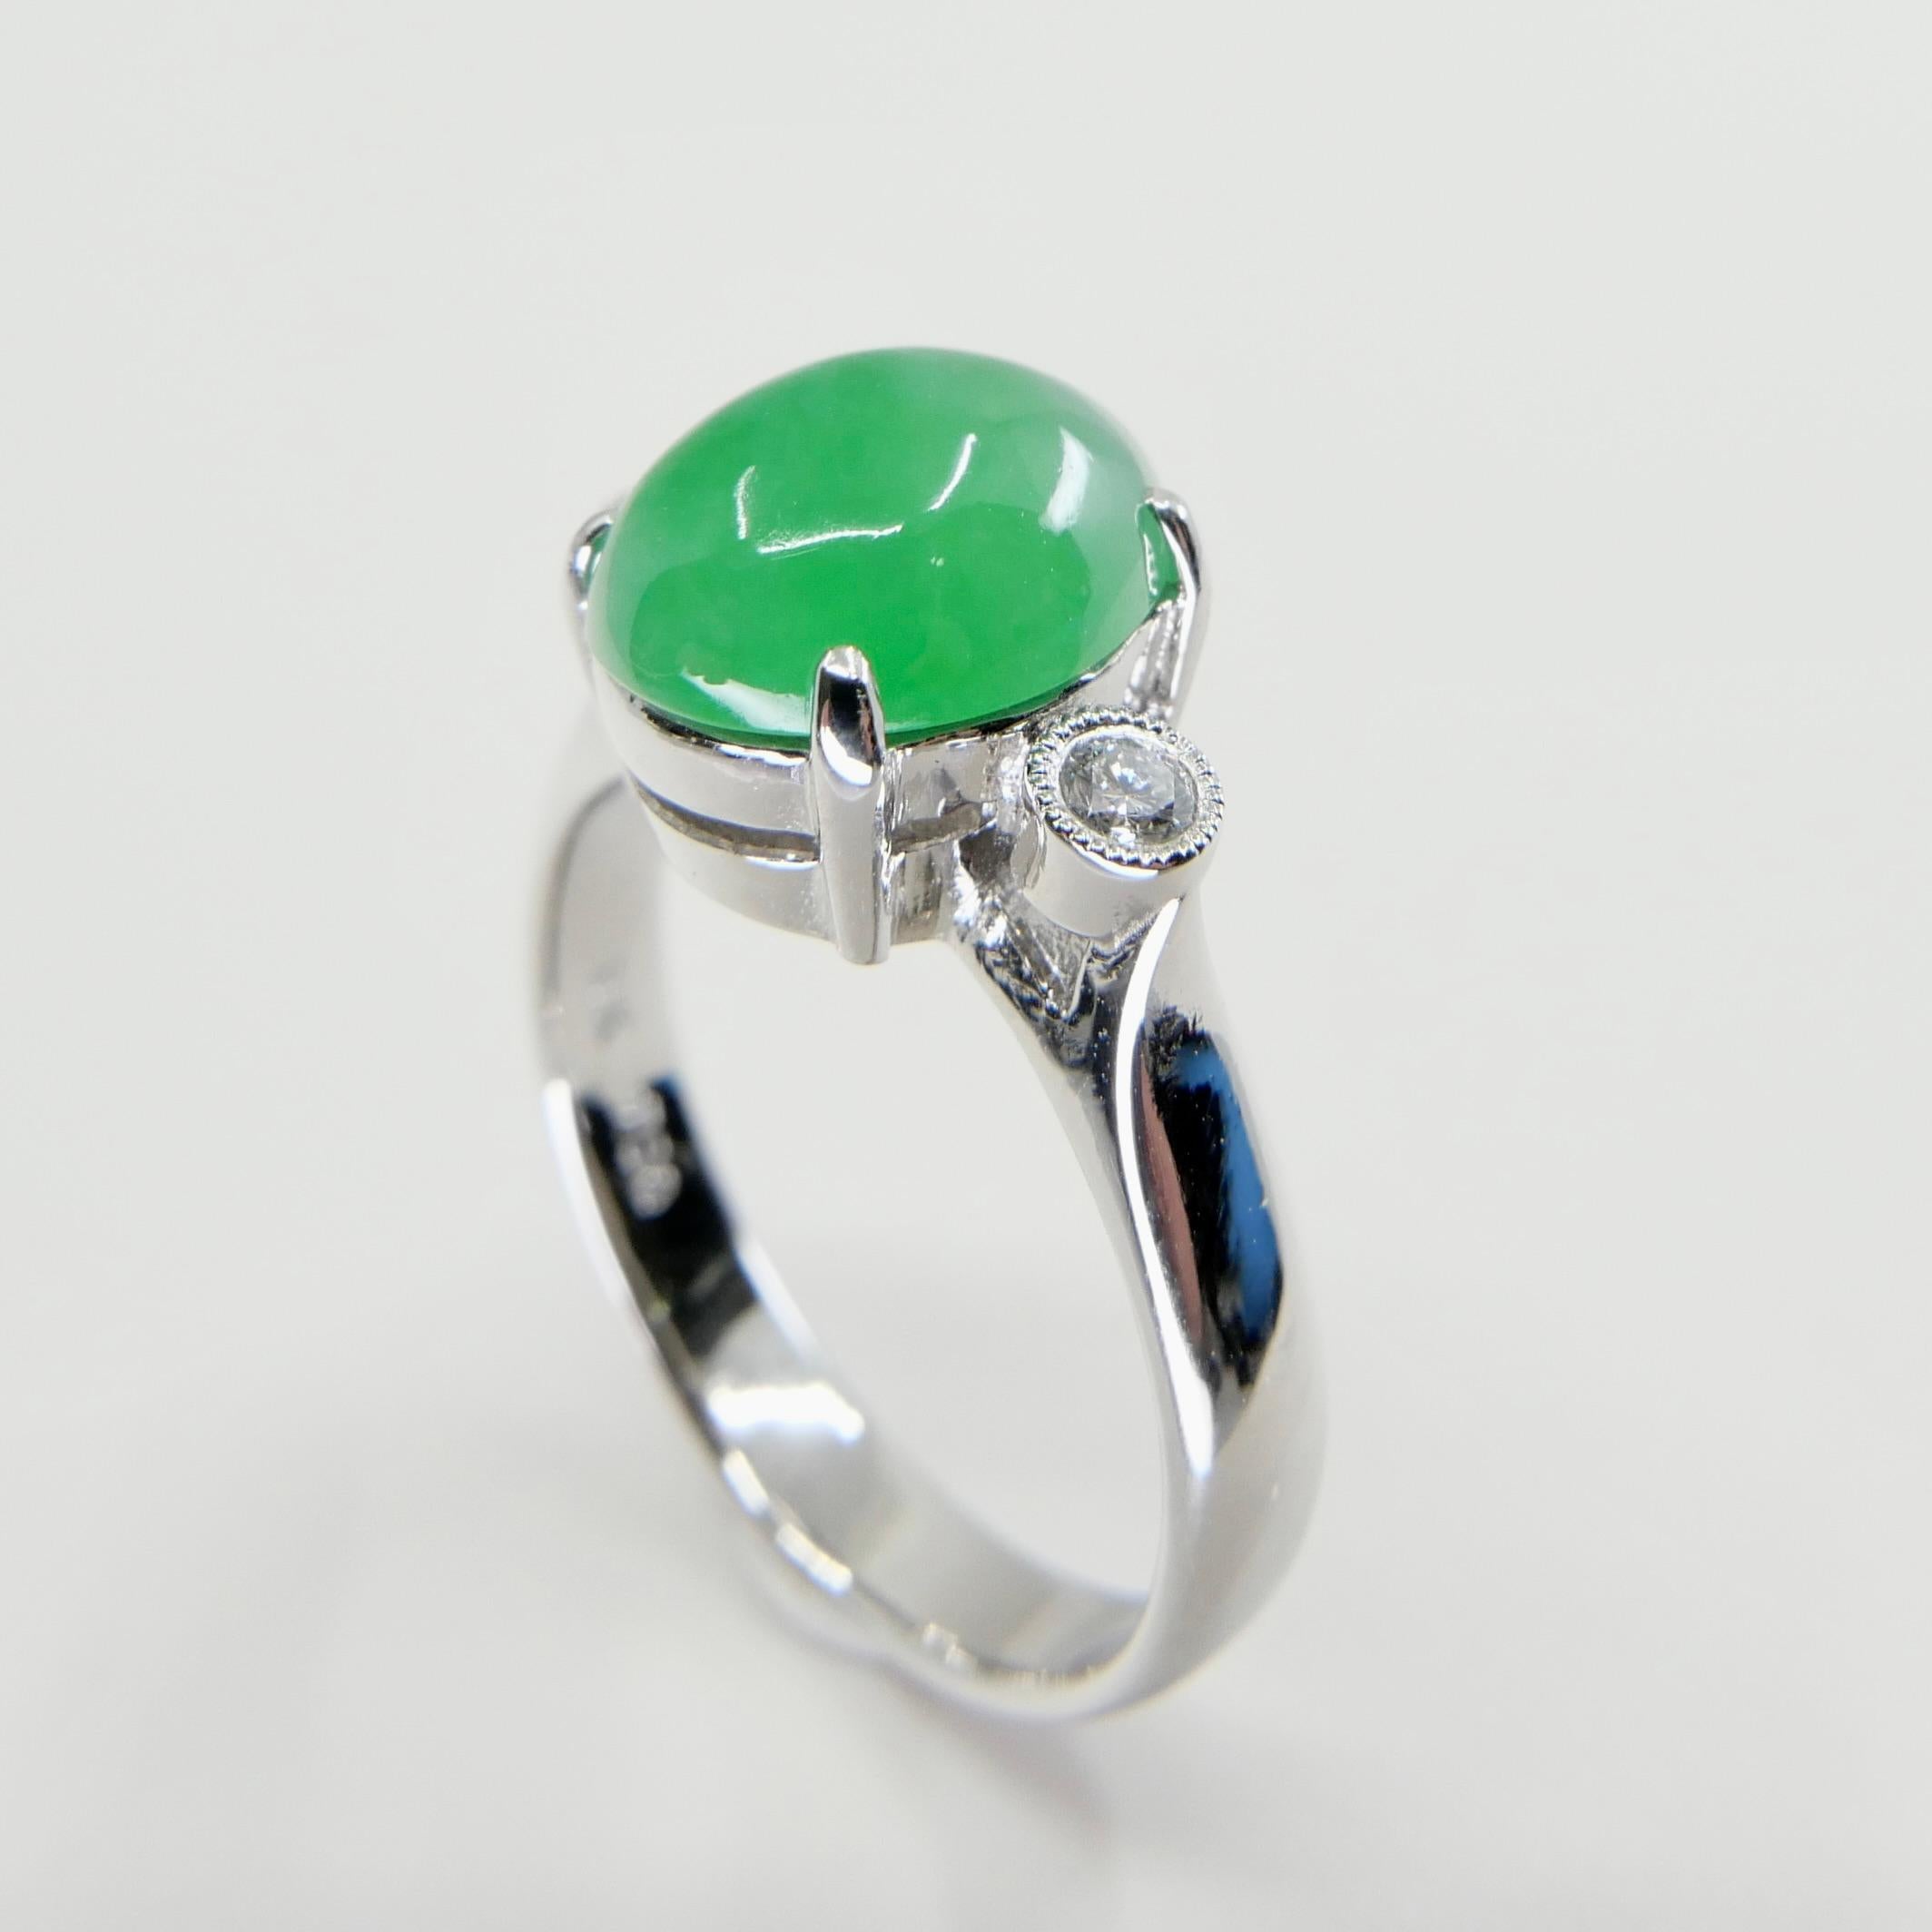 Cabochon Certified Type a Jade & Oval Diamond 3 Stone Ring, Glowing Apple Green Color For Sale